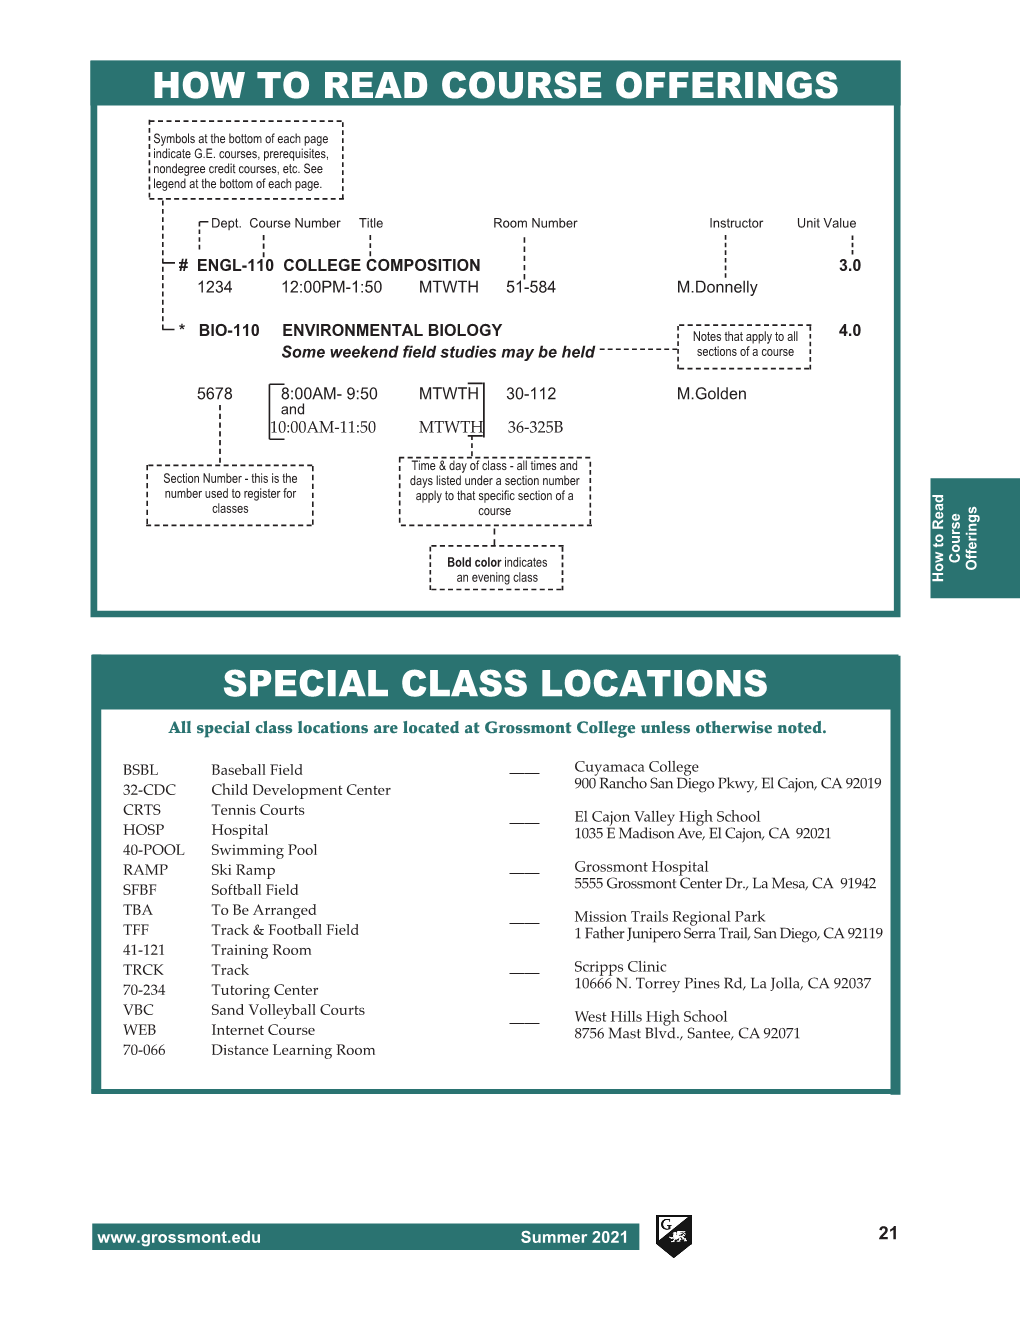 How to Read Course Offerings Special Class Locations